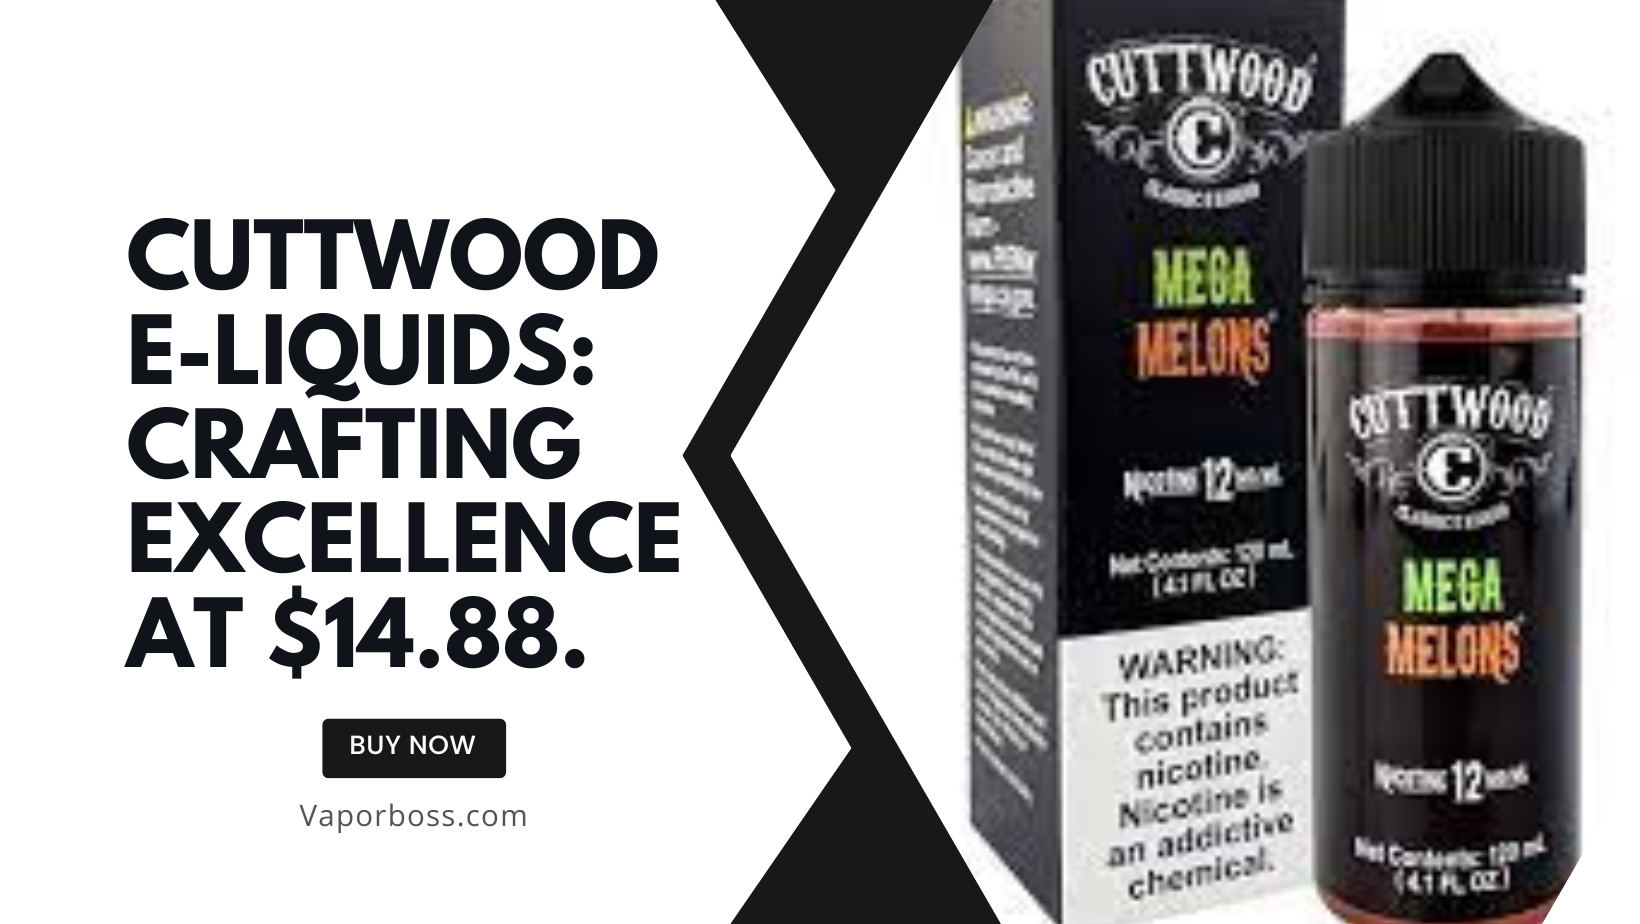 Cuttwood E-liquids: Crafting Excellence at $14.88.